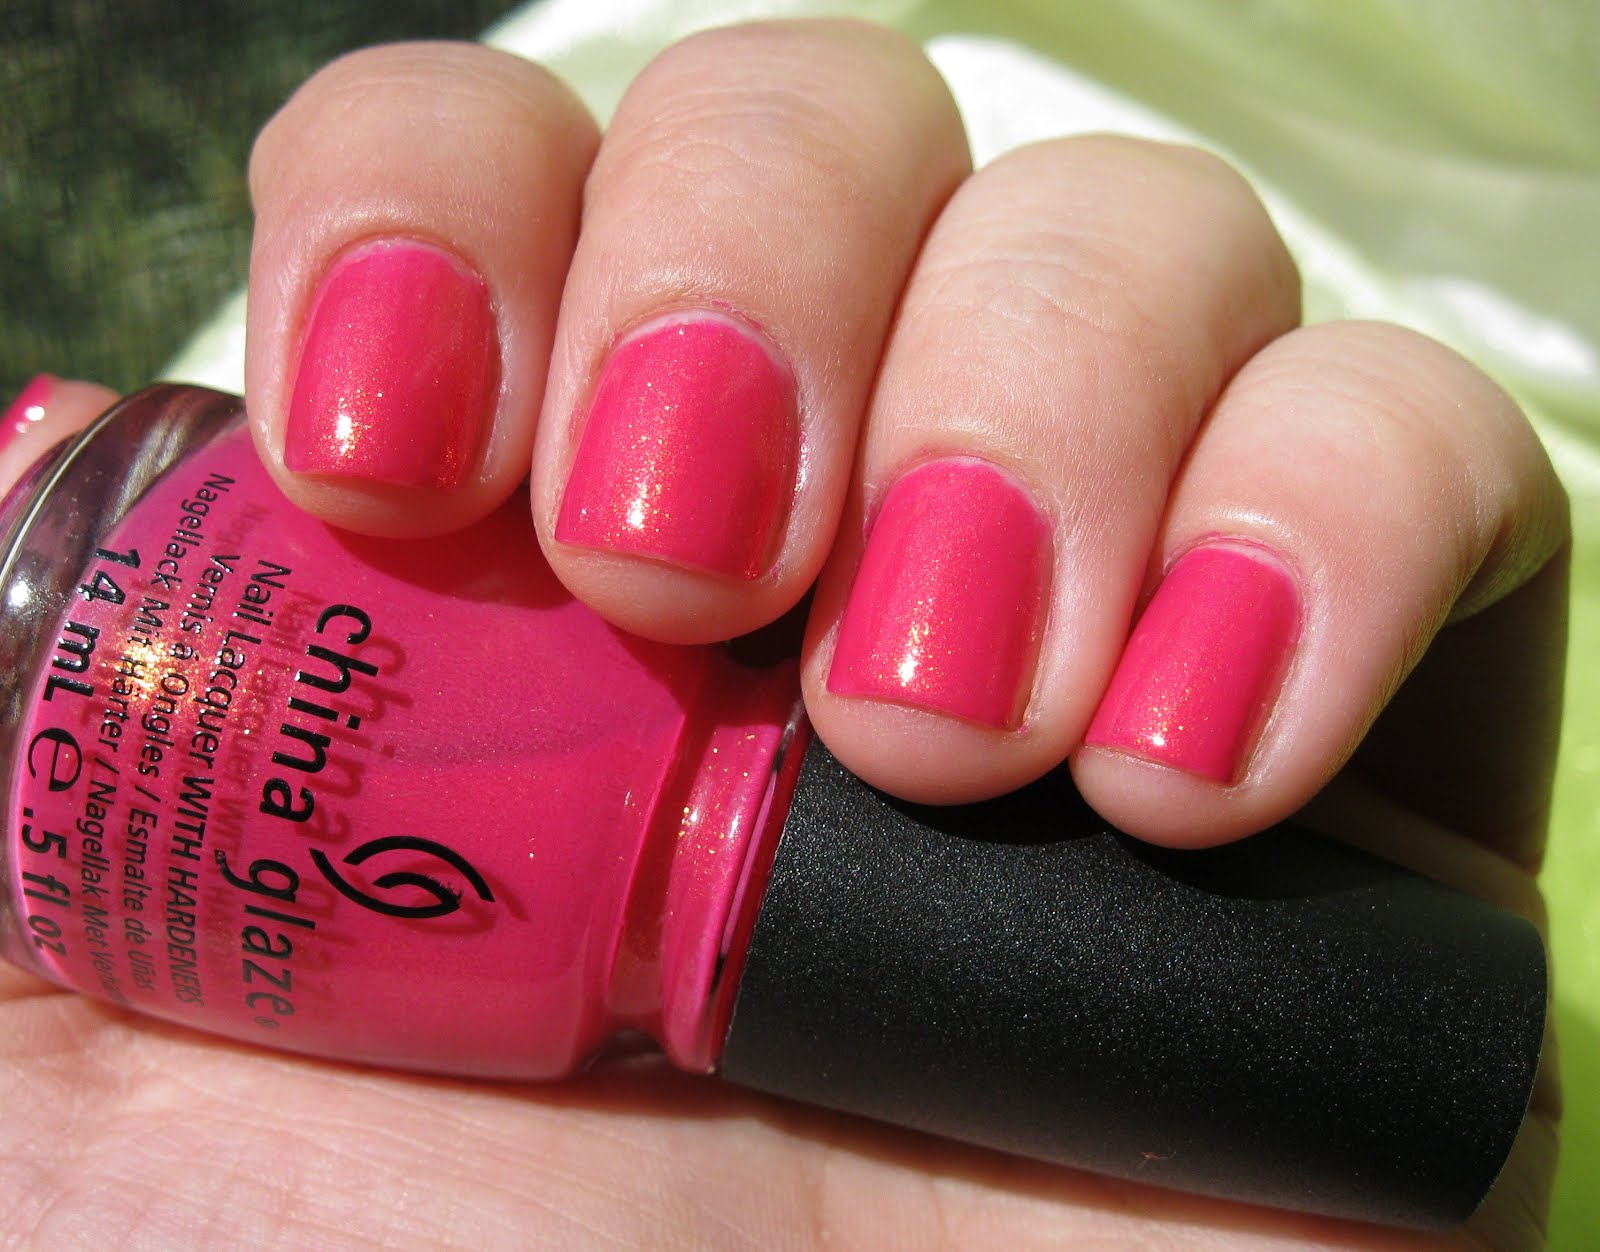 4. China Glaze Nail Lacquer in "Strawberry Fields" - wide 2